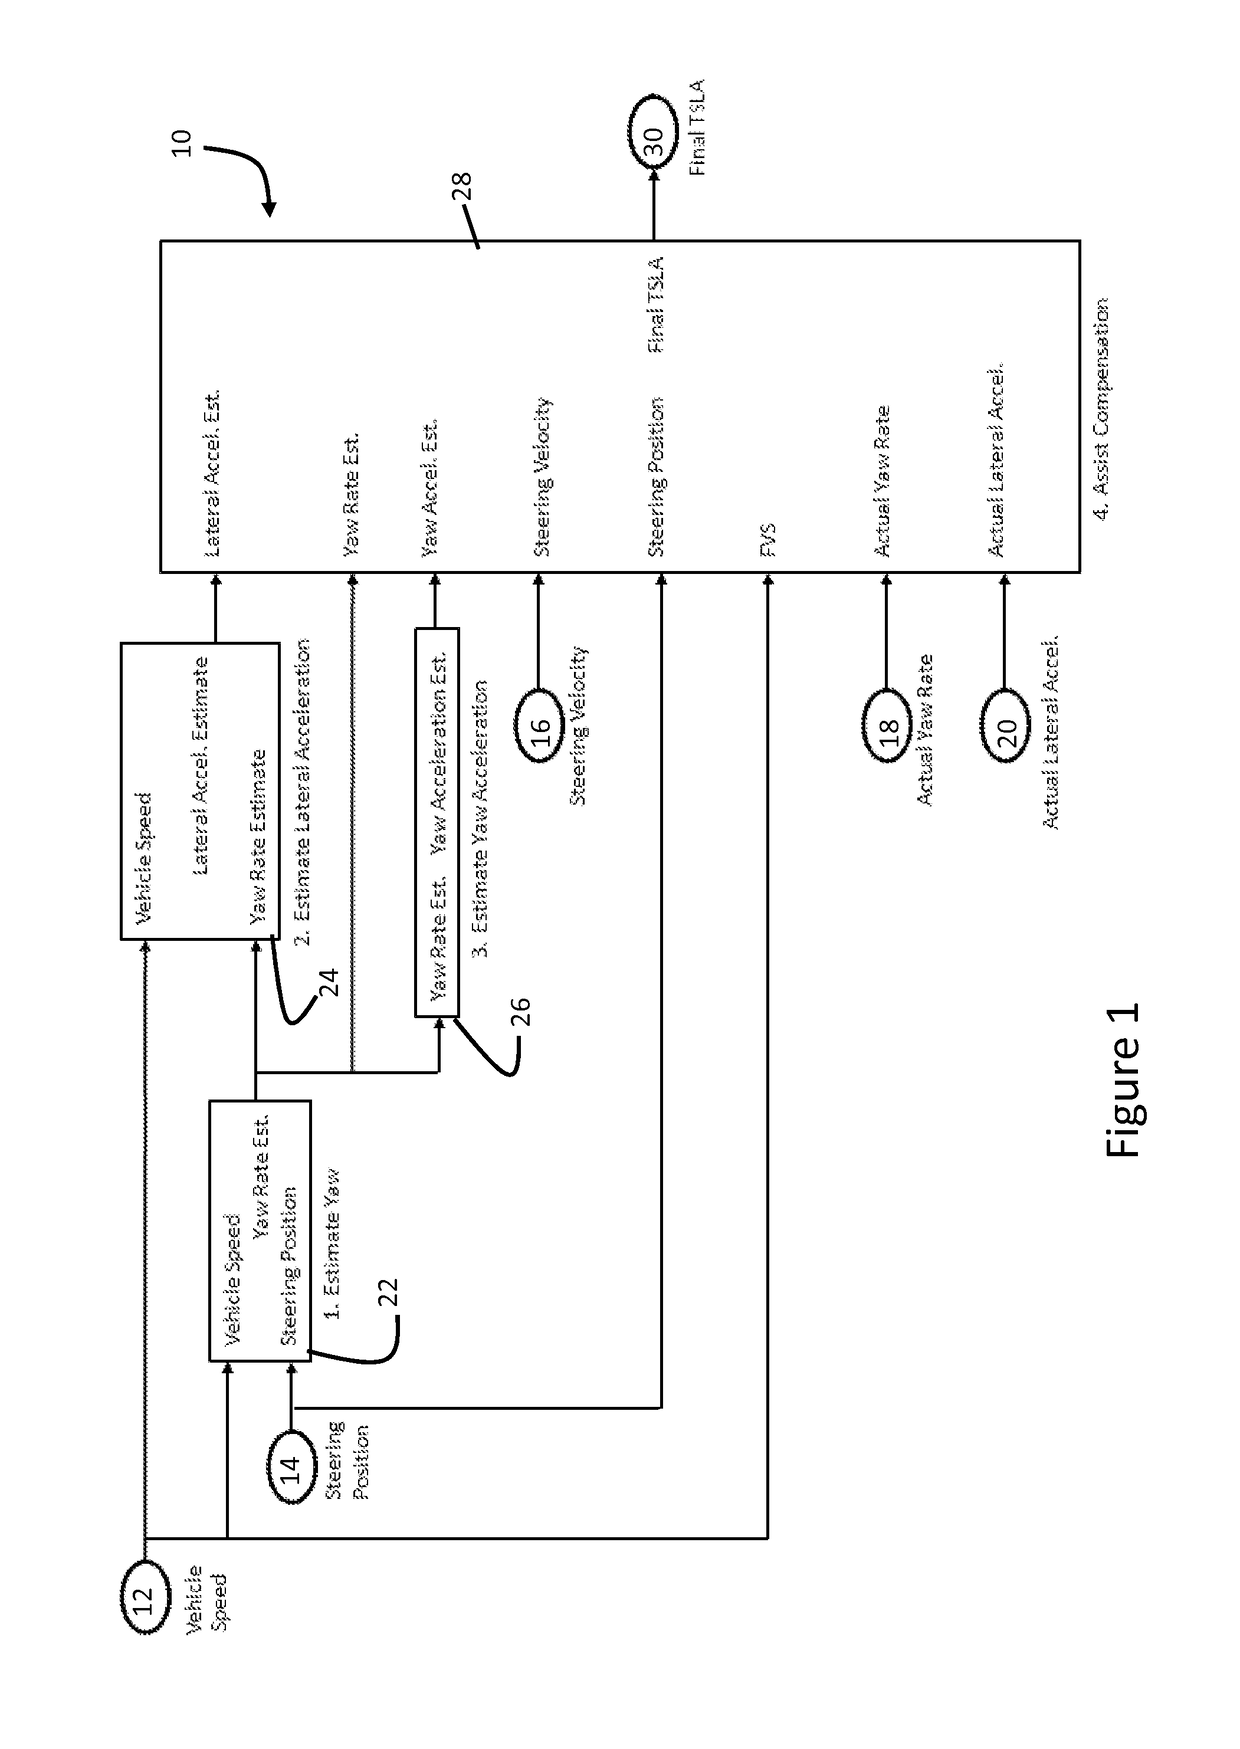 Assist Compensation For Actively Controlled Power Steering Systems